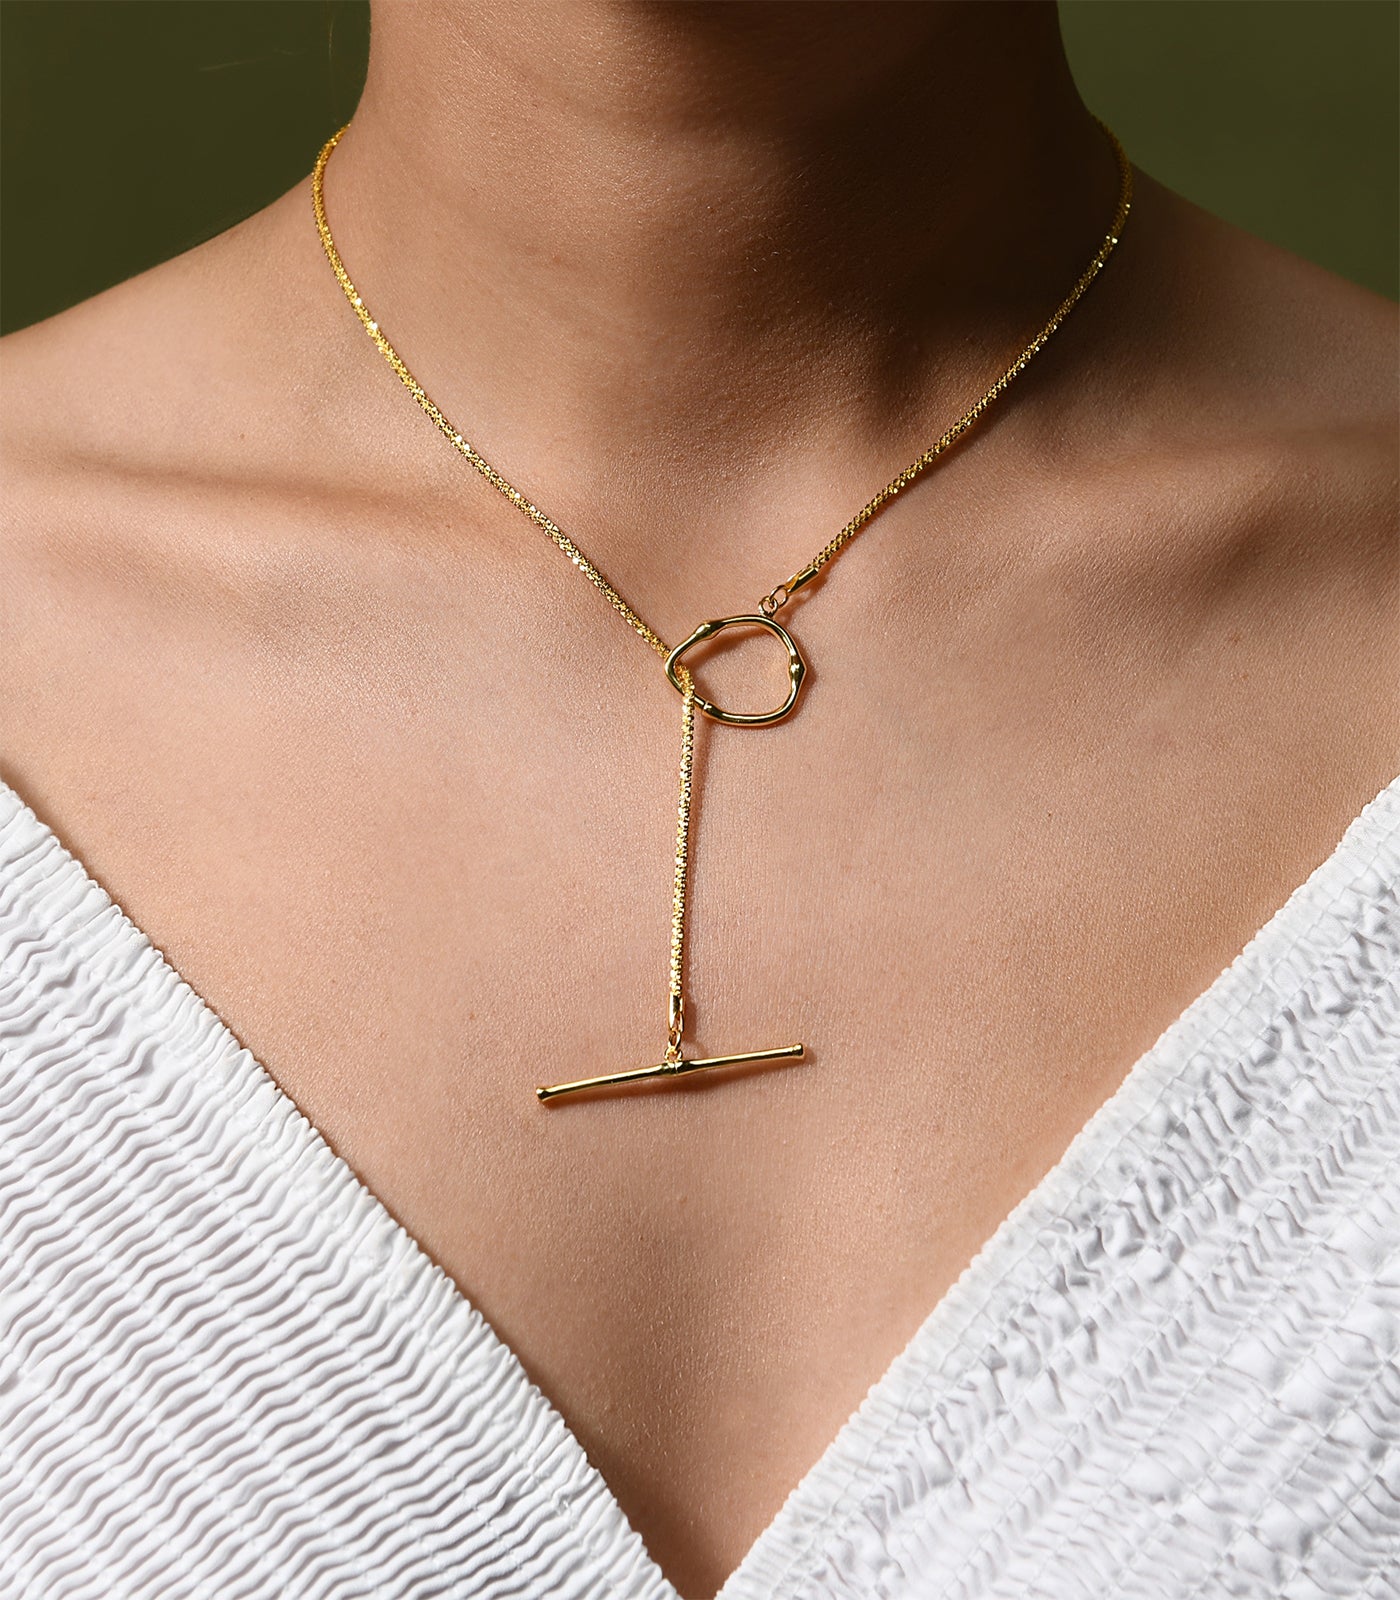 A  gold vermeil necklace which has a dainty chain and a toggle clasp design worn at the front.